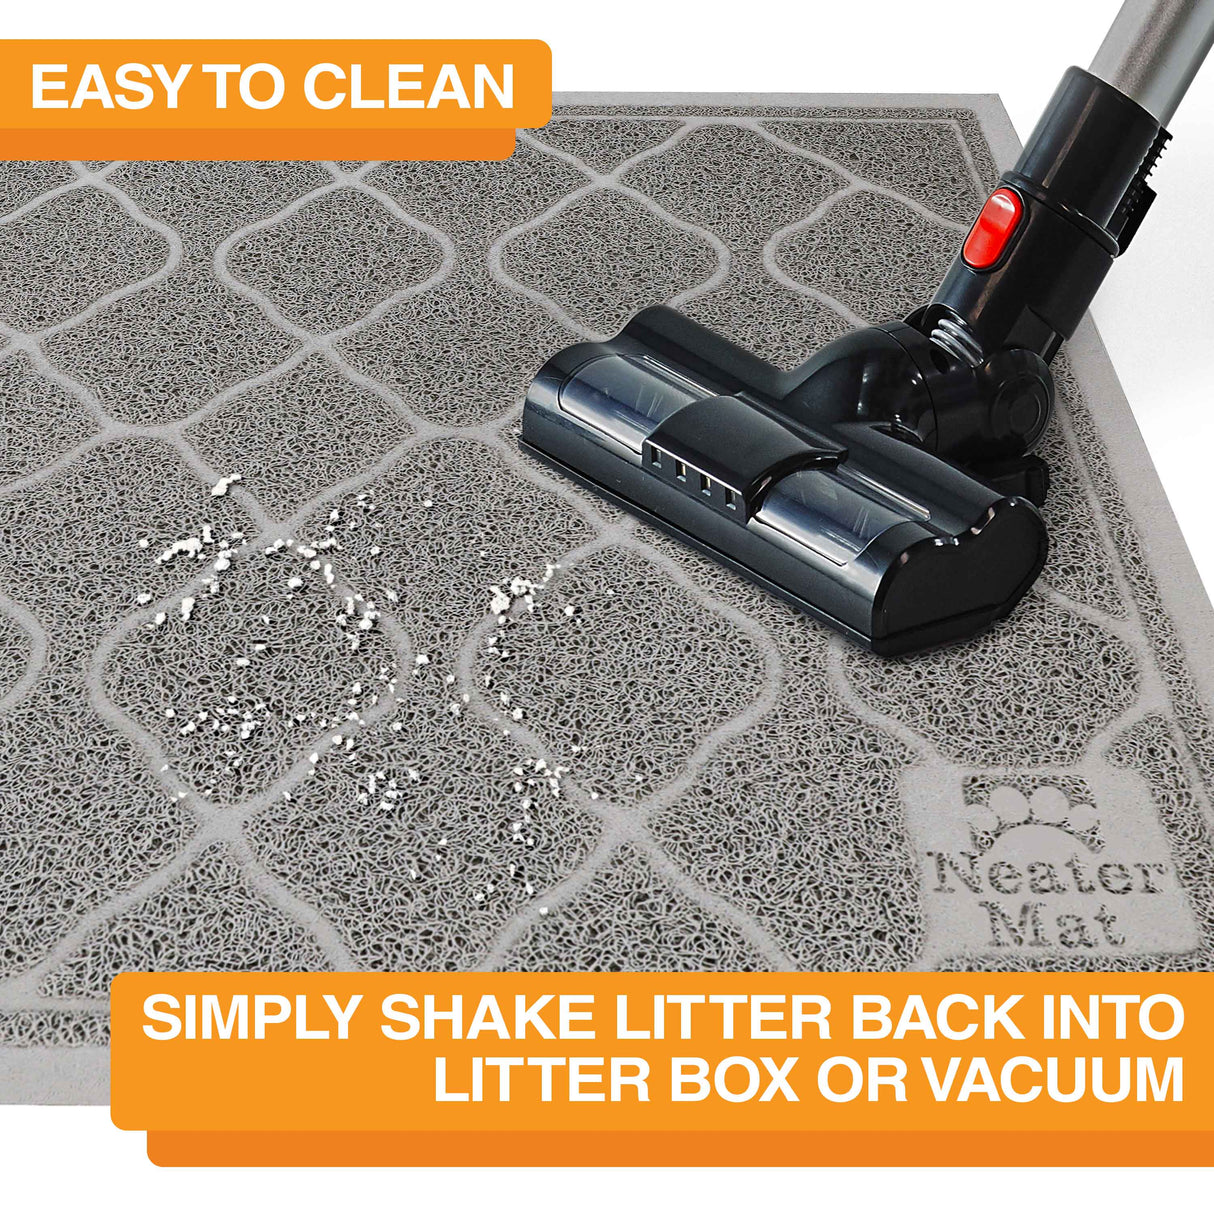 Neater Pets Litter Trapping Mat is easy to clean with a vacuum